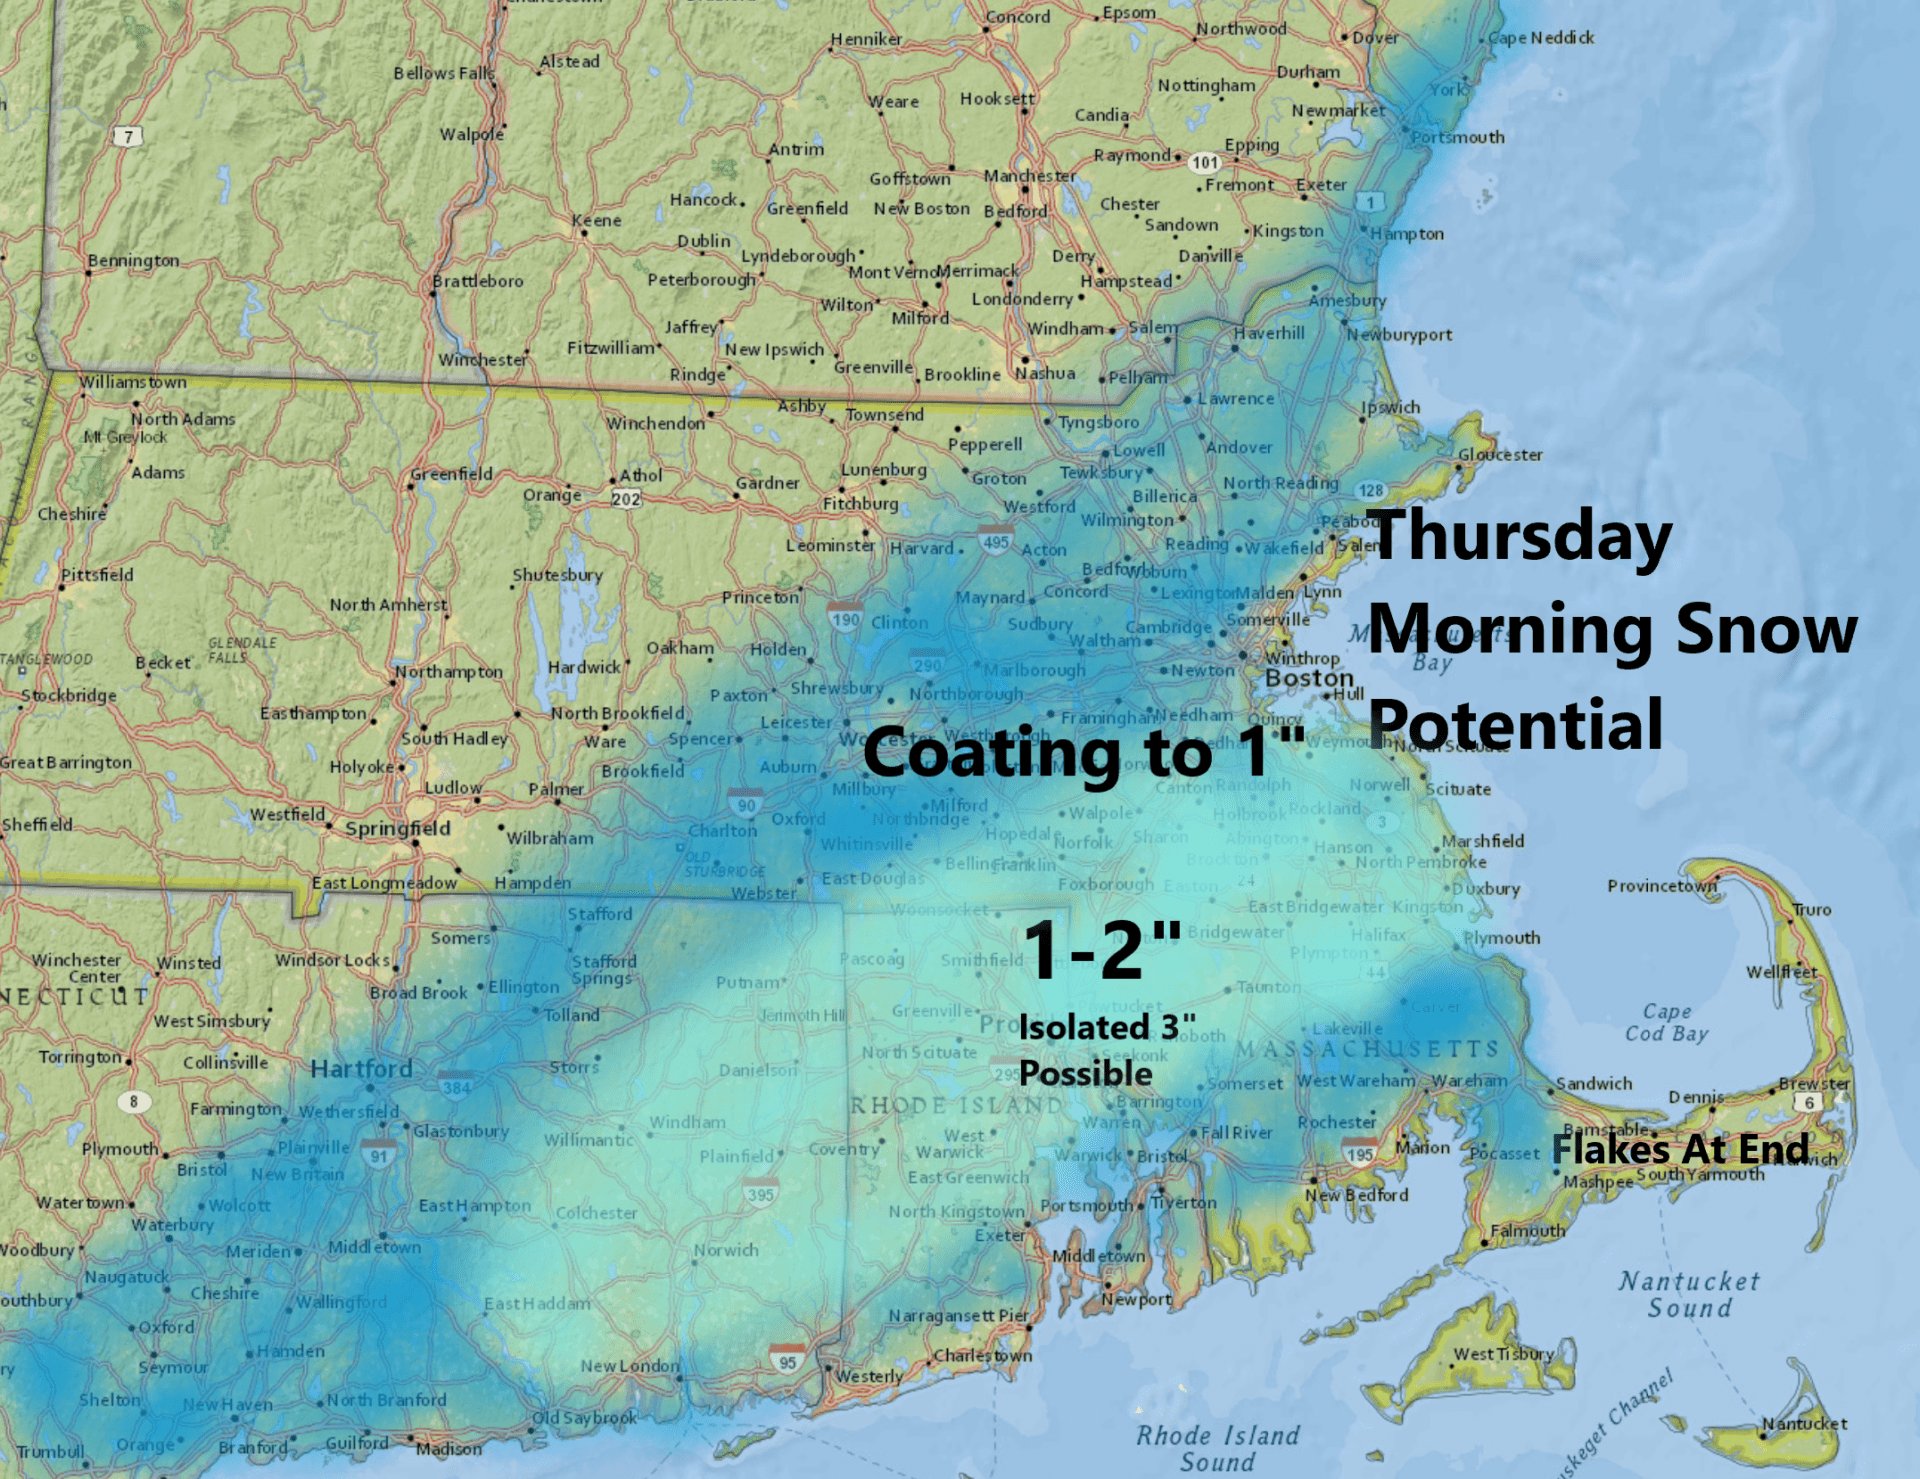 Some light snow is likely on Thursday morning during the commute. (Dave Epstein)